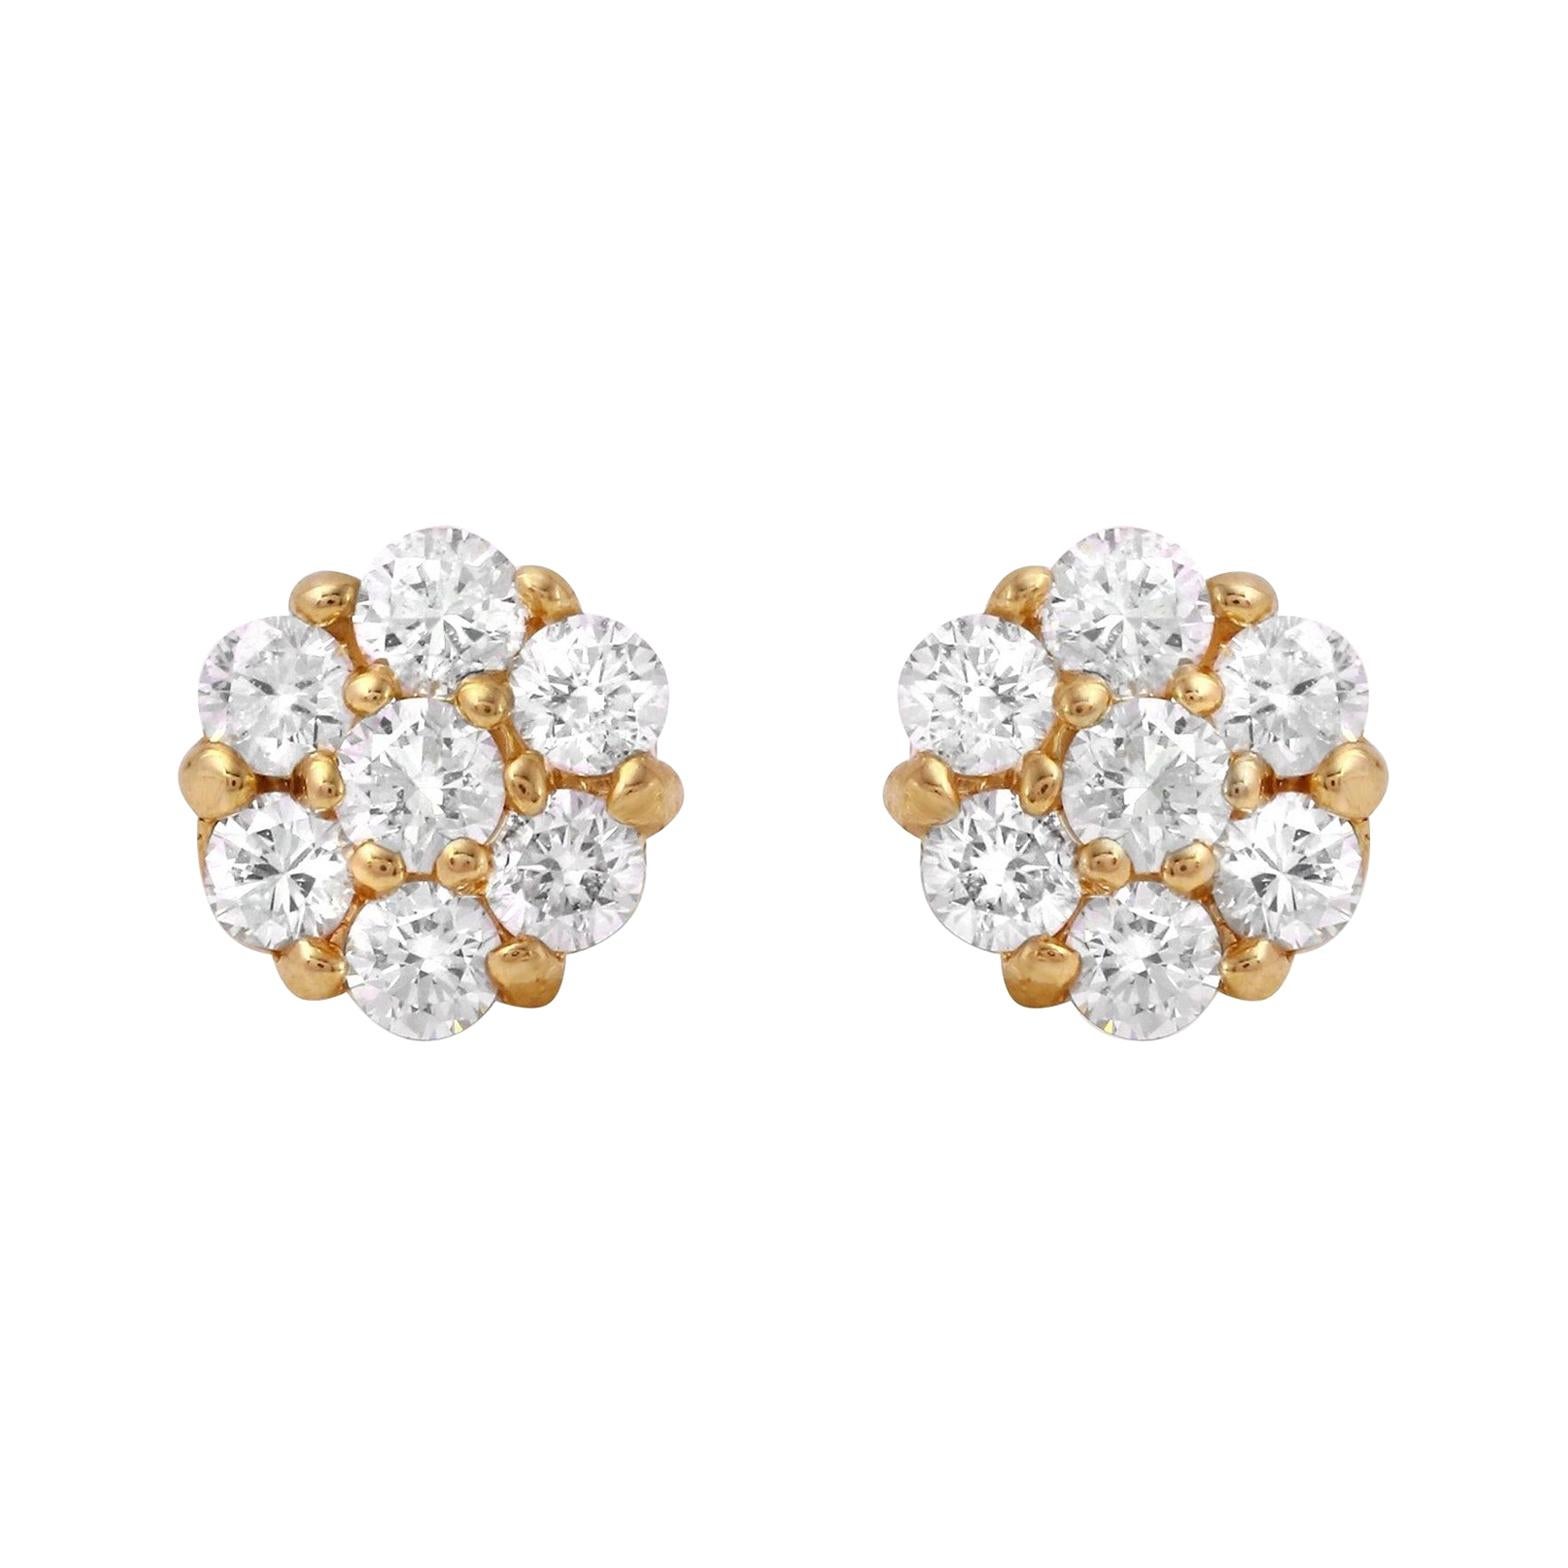 Exquisite 1.00 Carat Natural Diamond 14 Karat Solid Yellow Gold Earrings For Sale